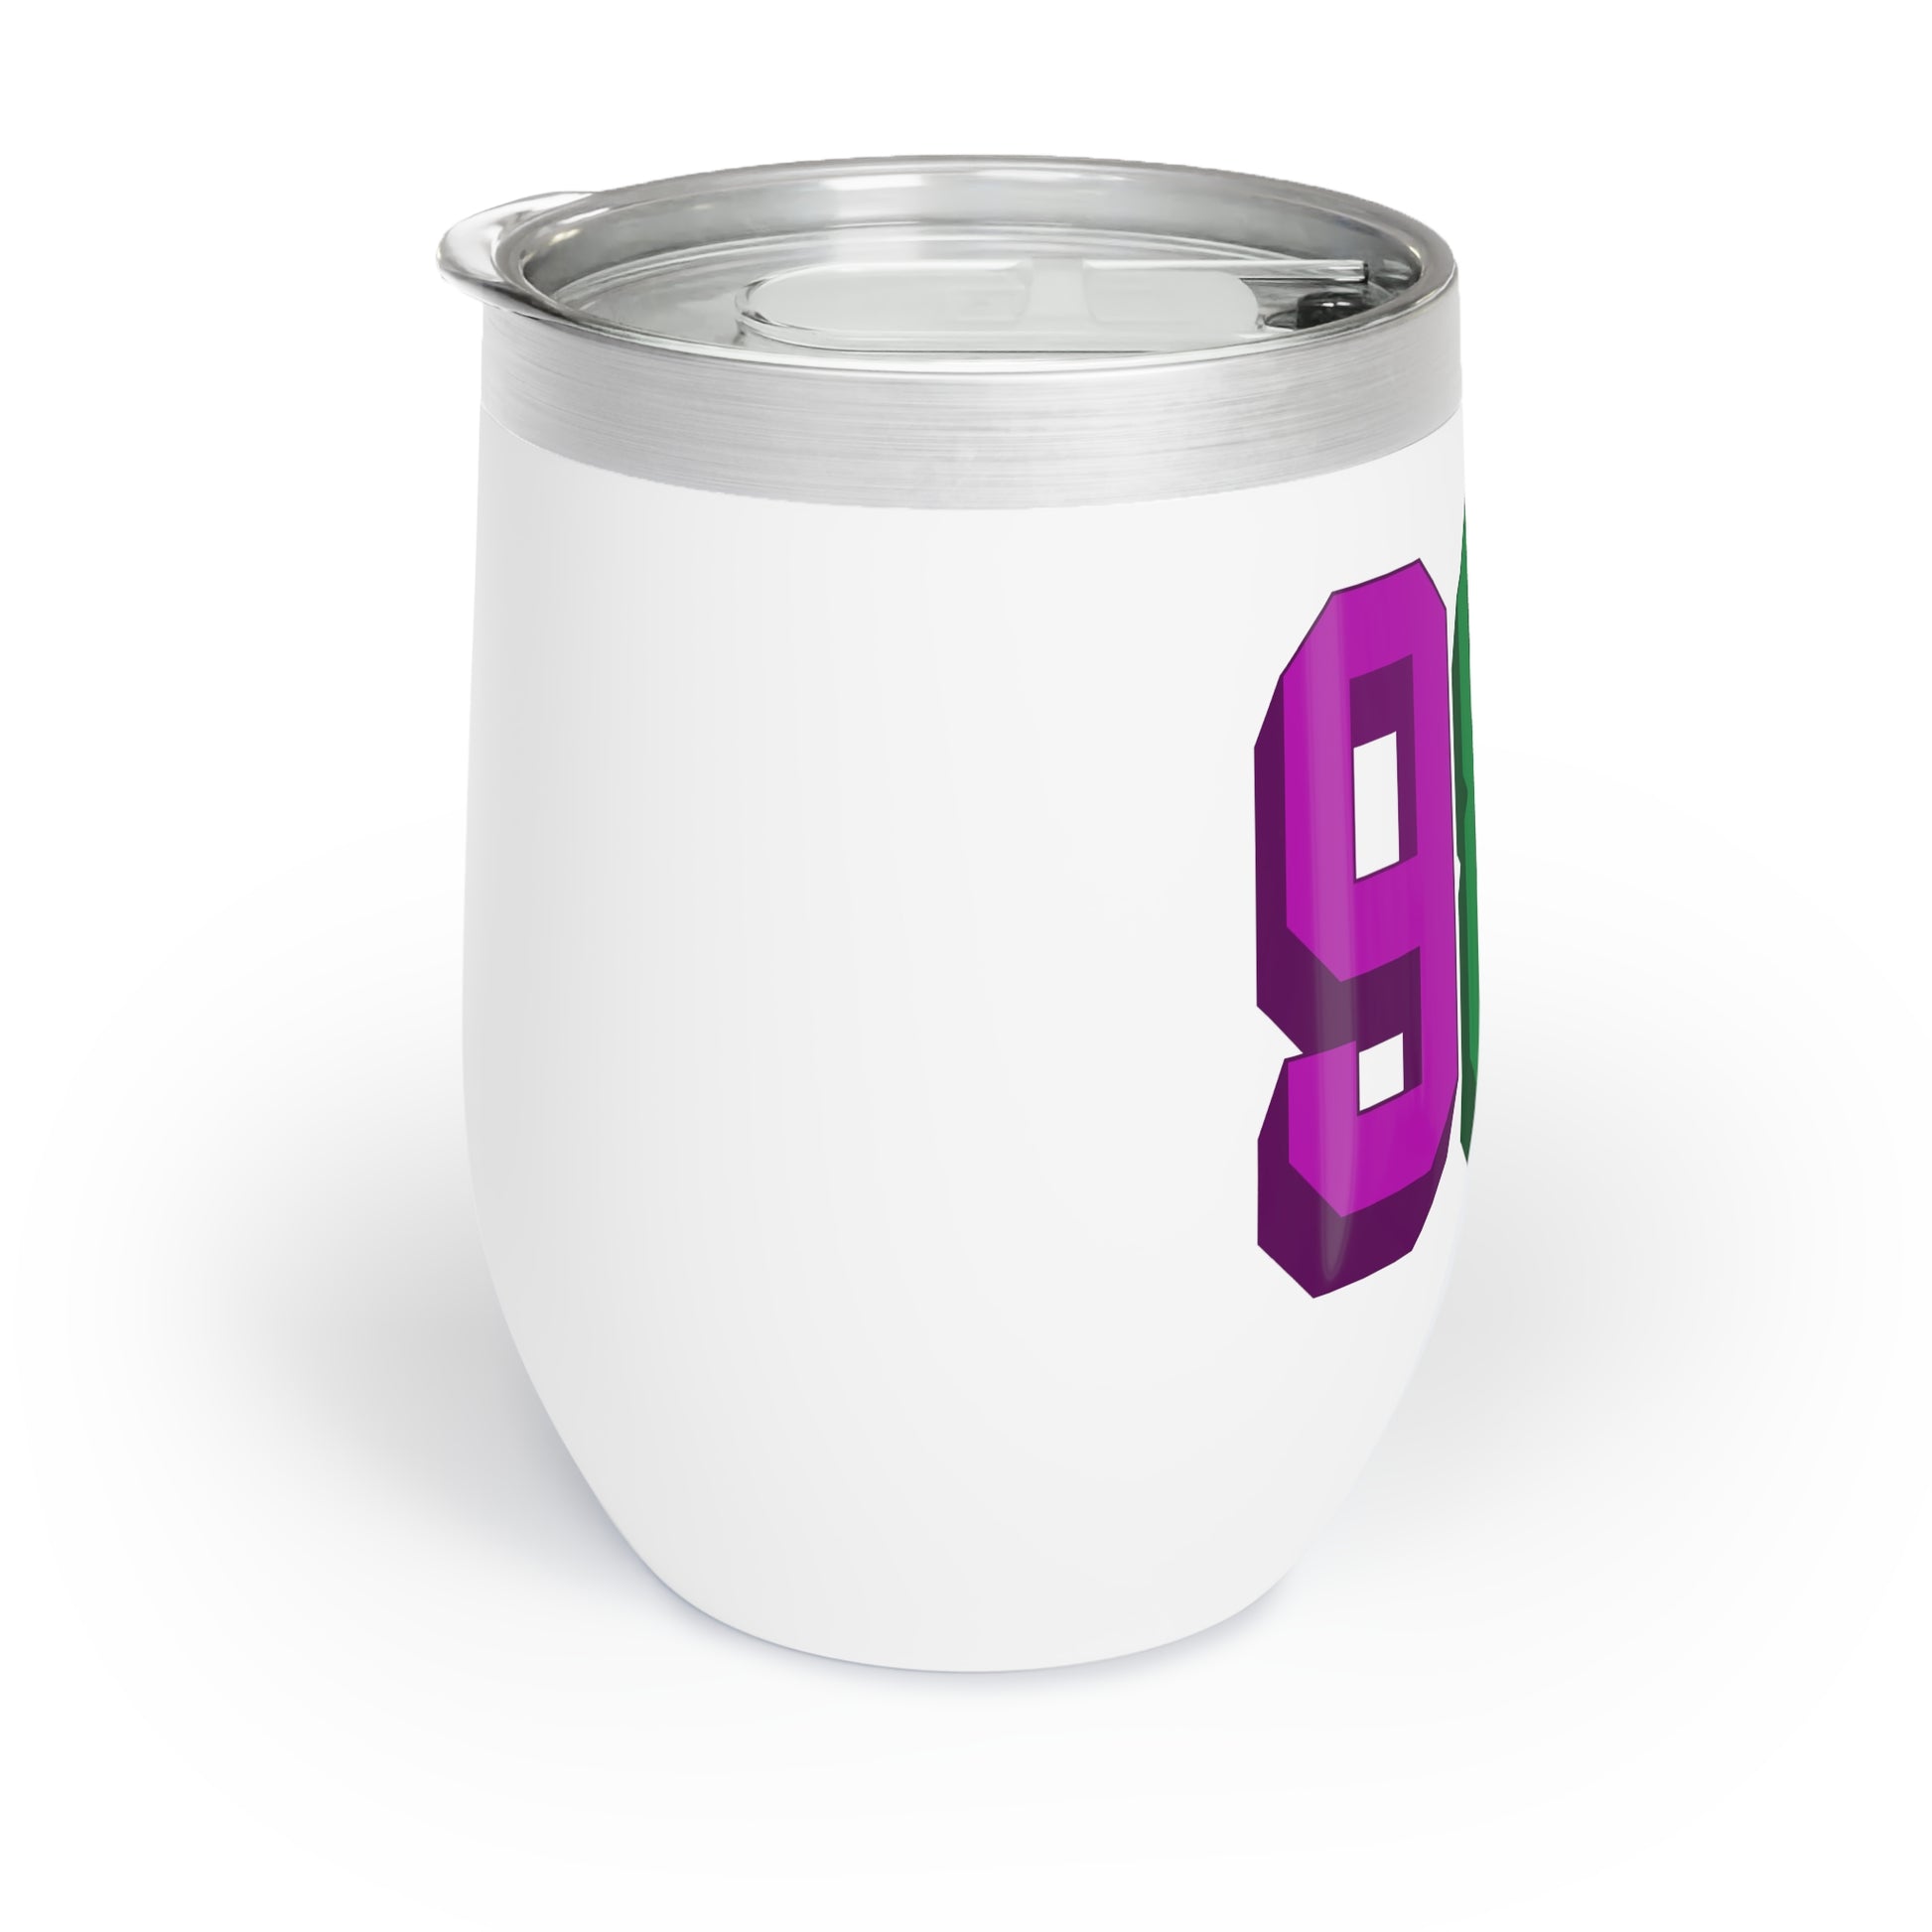 mardi gras themed wine tumbler with "985" area code printed on it